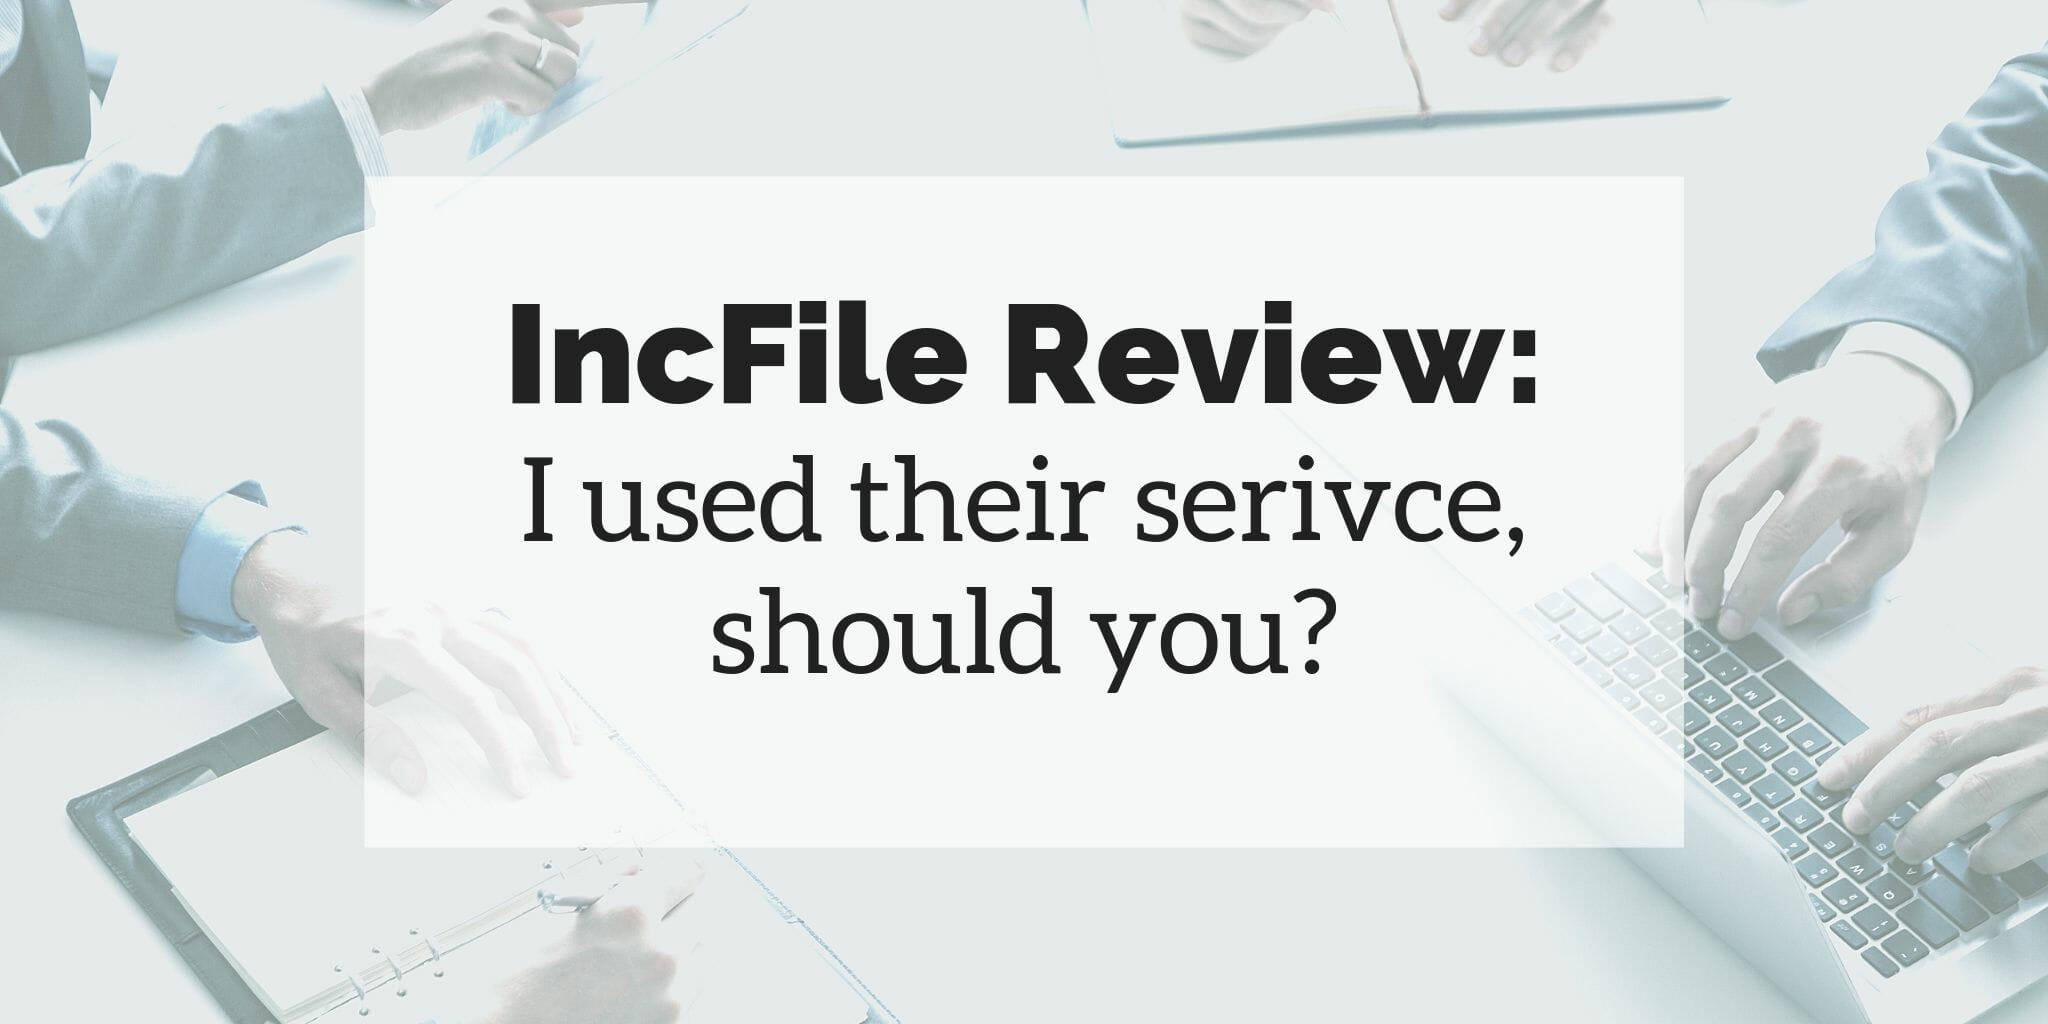 IncFile Review: I Used Their Service, Should You?